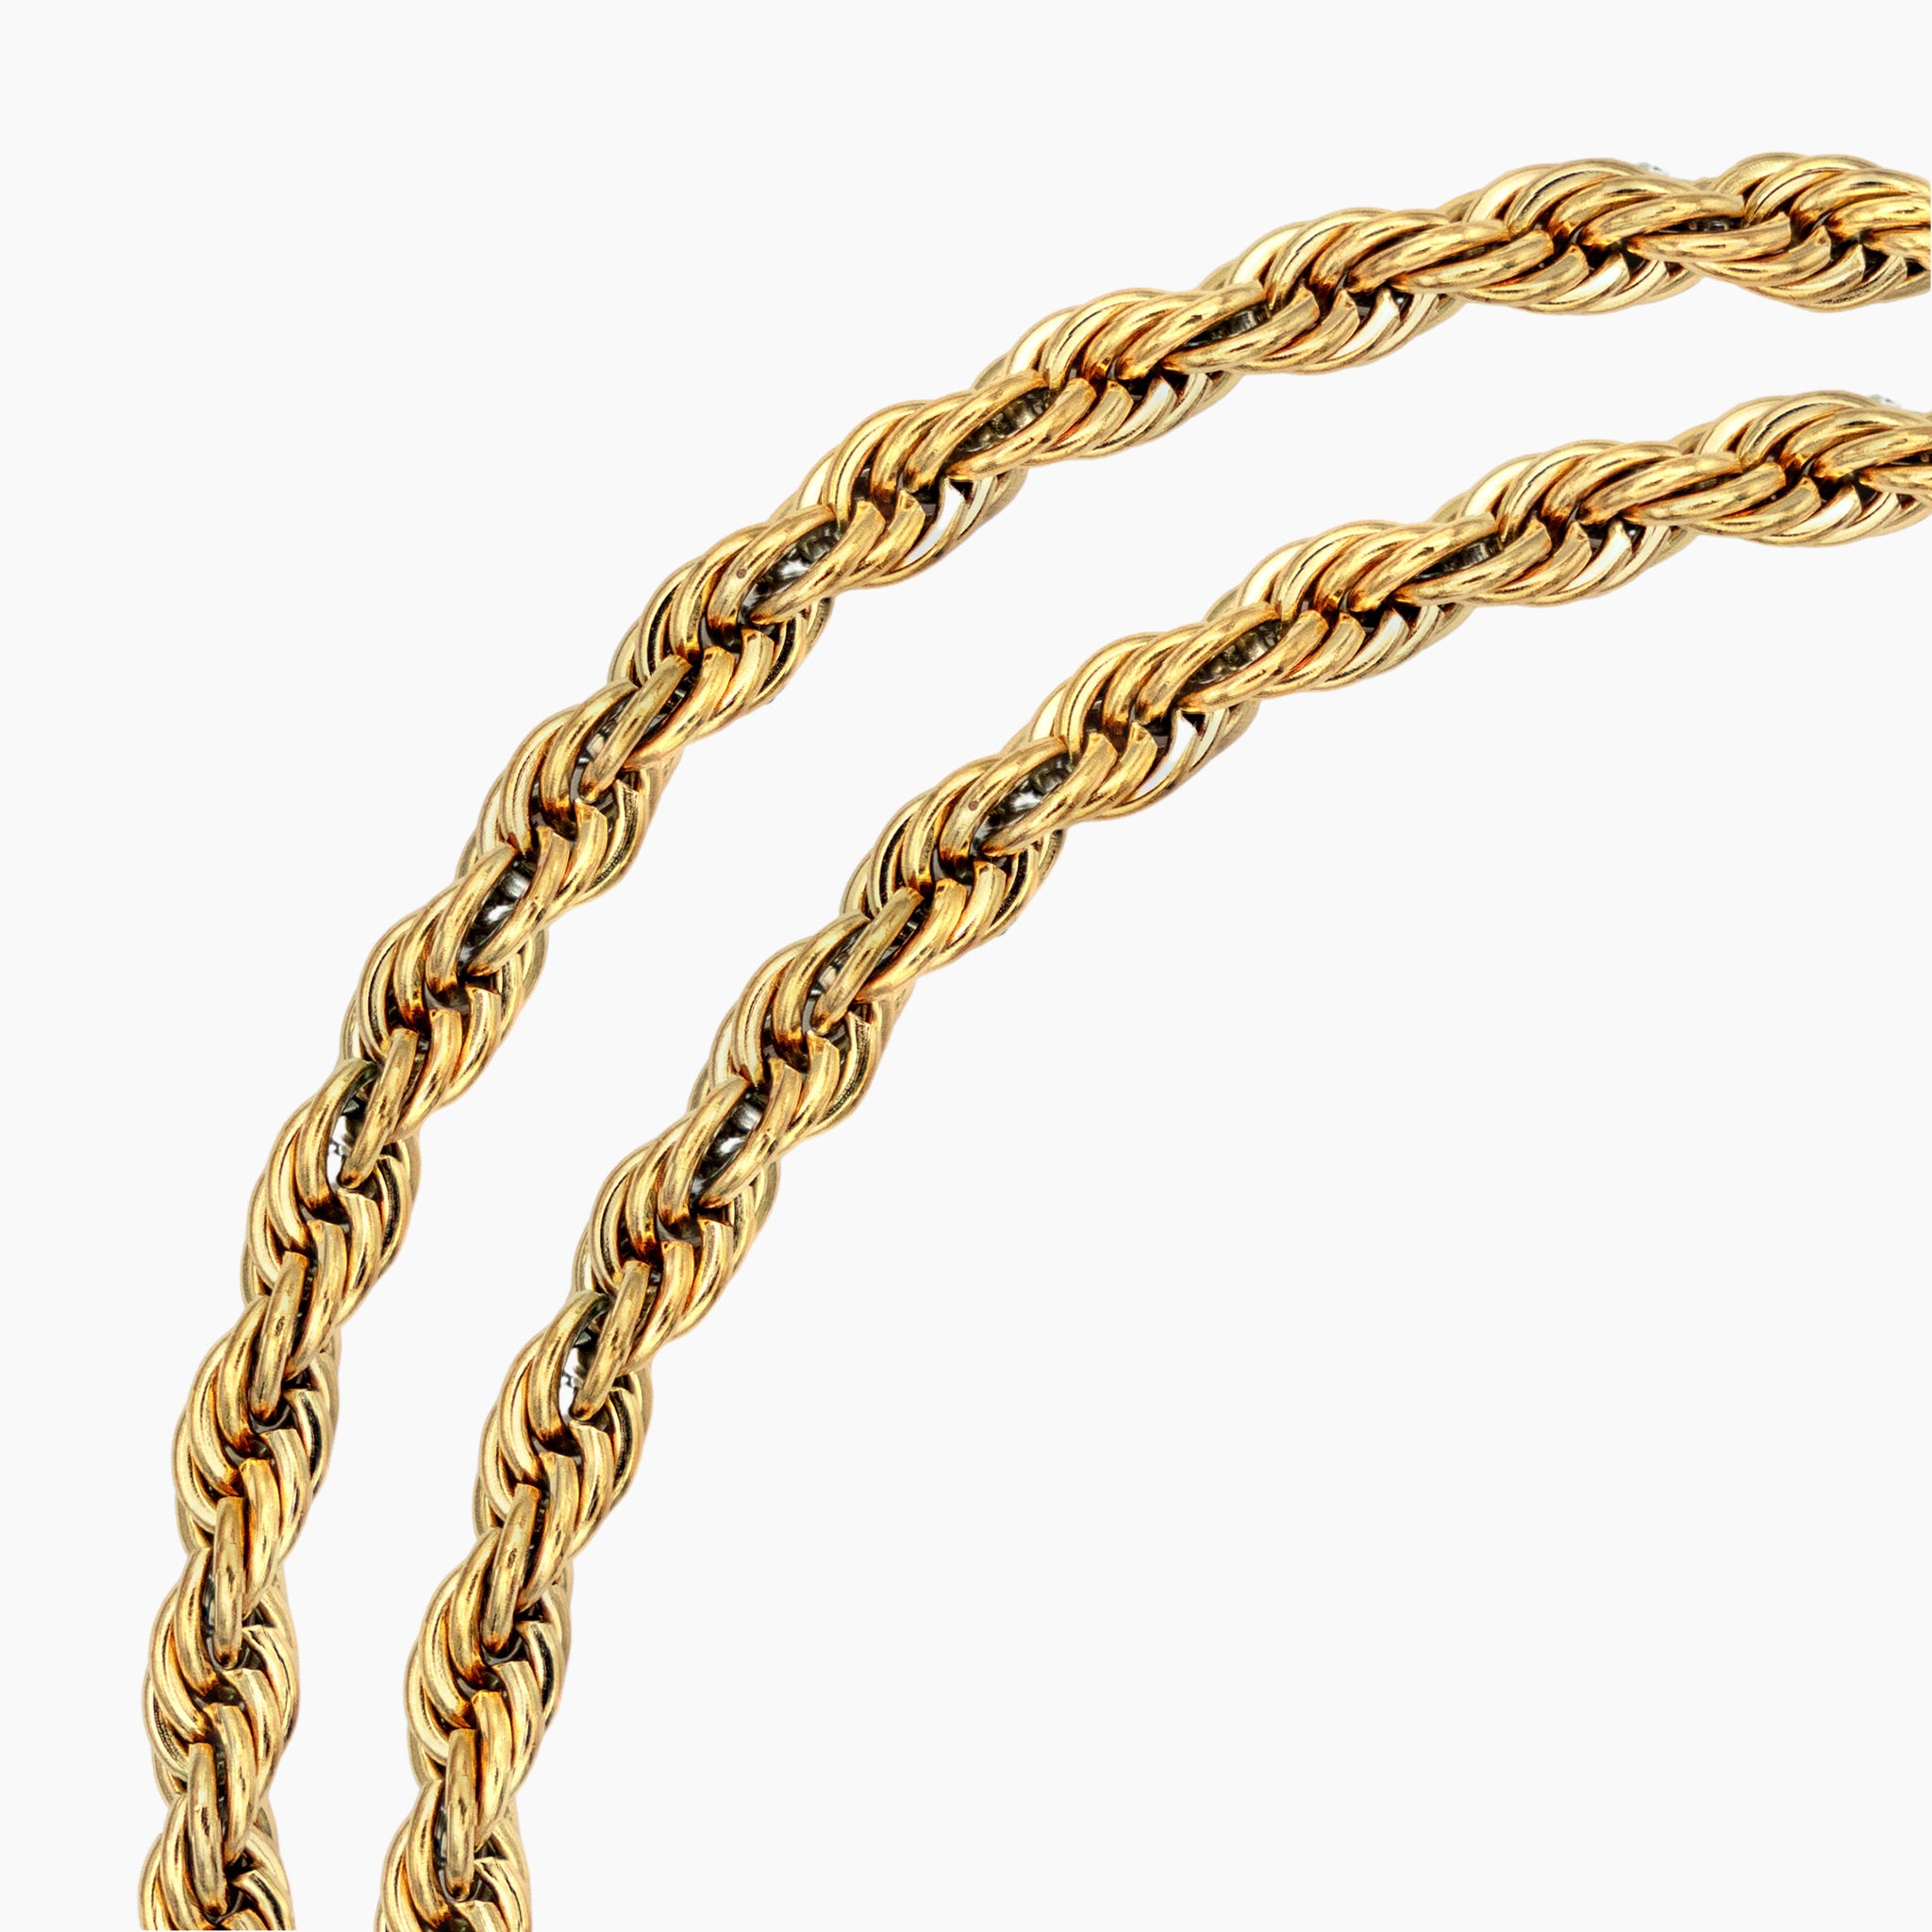 5mm Twisted Rope Chain Set - Gold